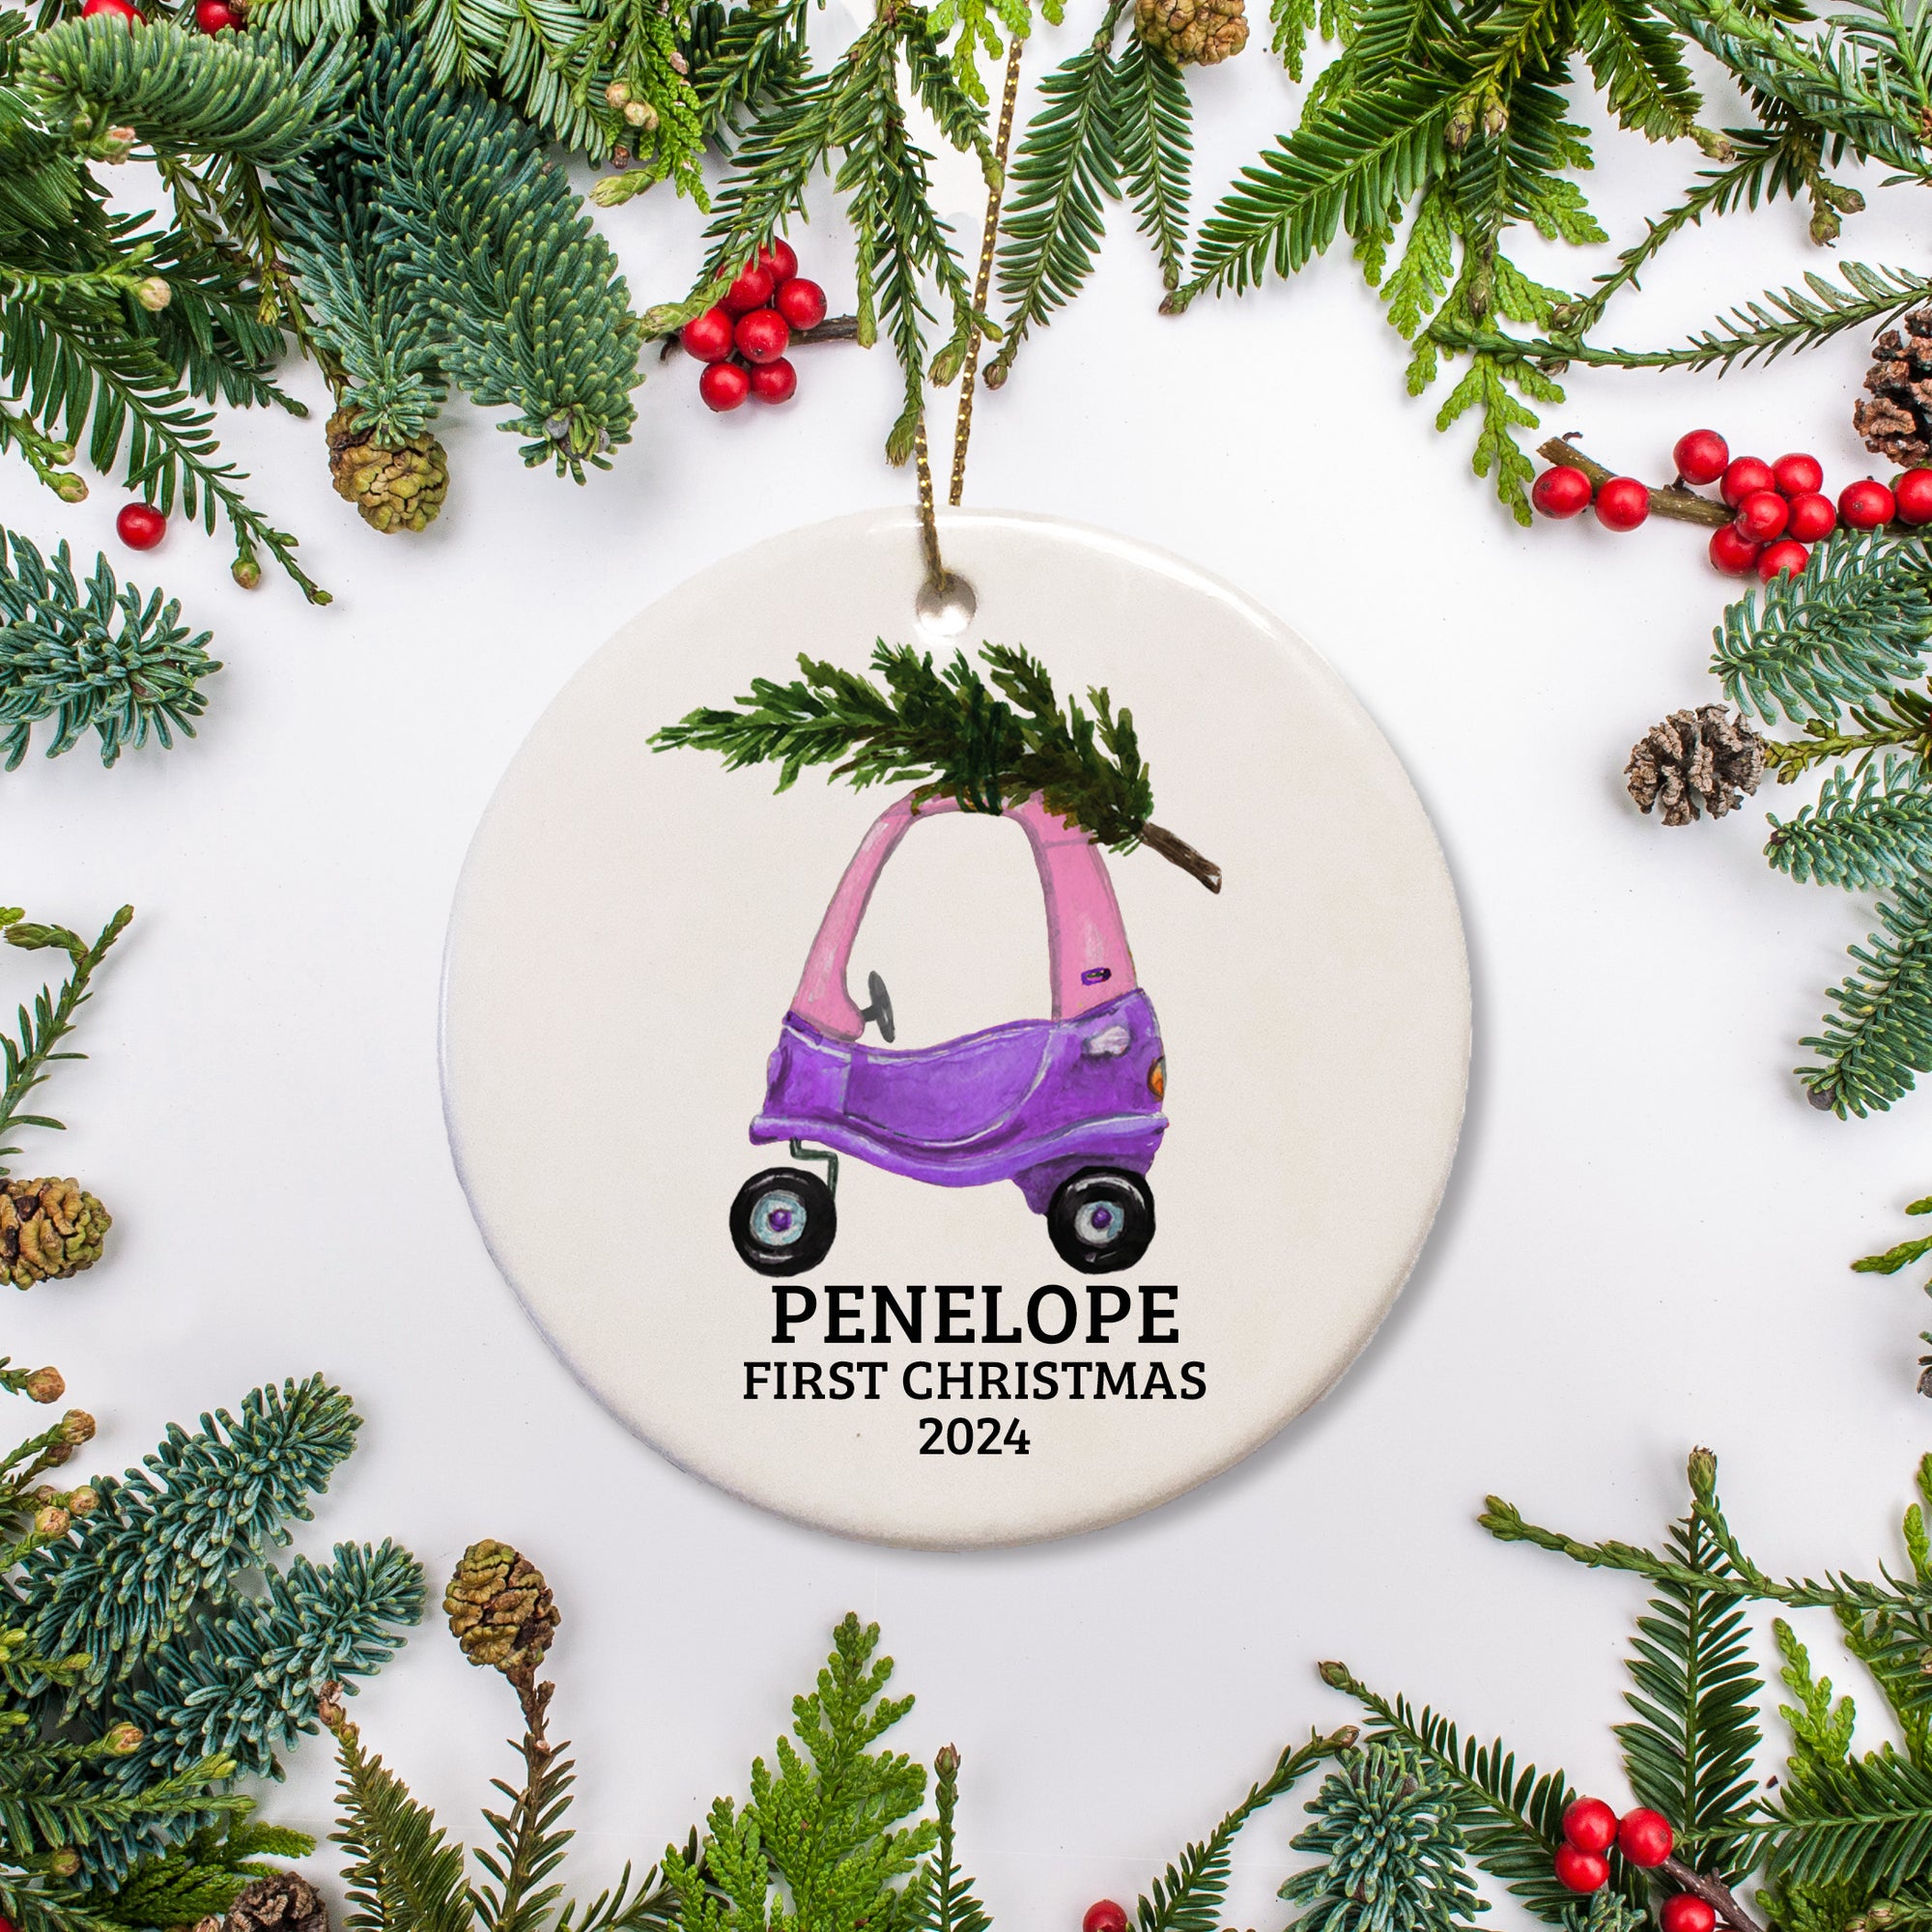 A toddler's  pink and purple car personalized on a ceramic ornament with a Christmas tree. This is a keepsake.